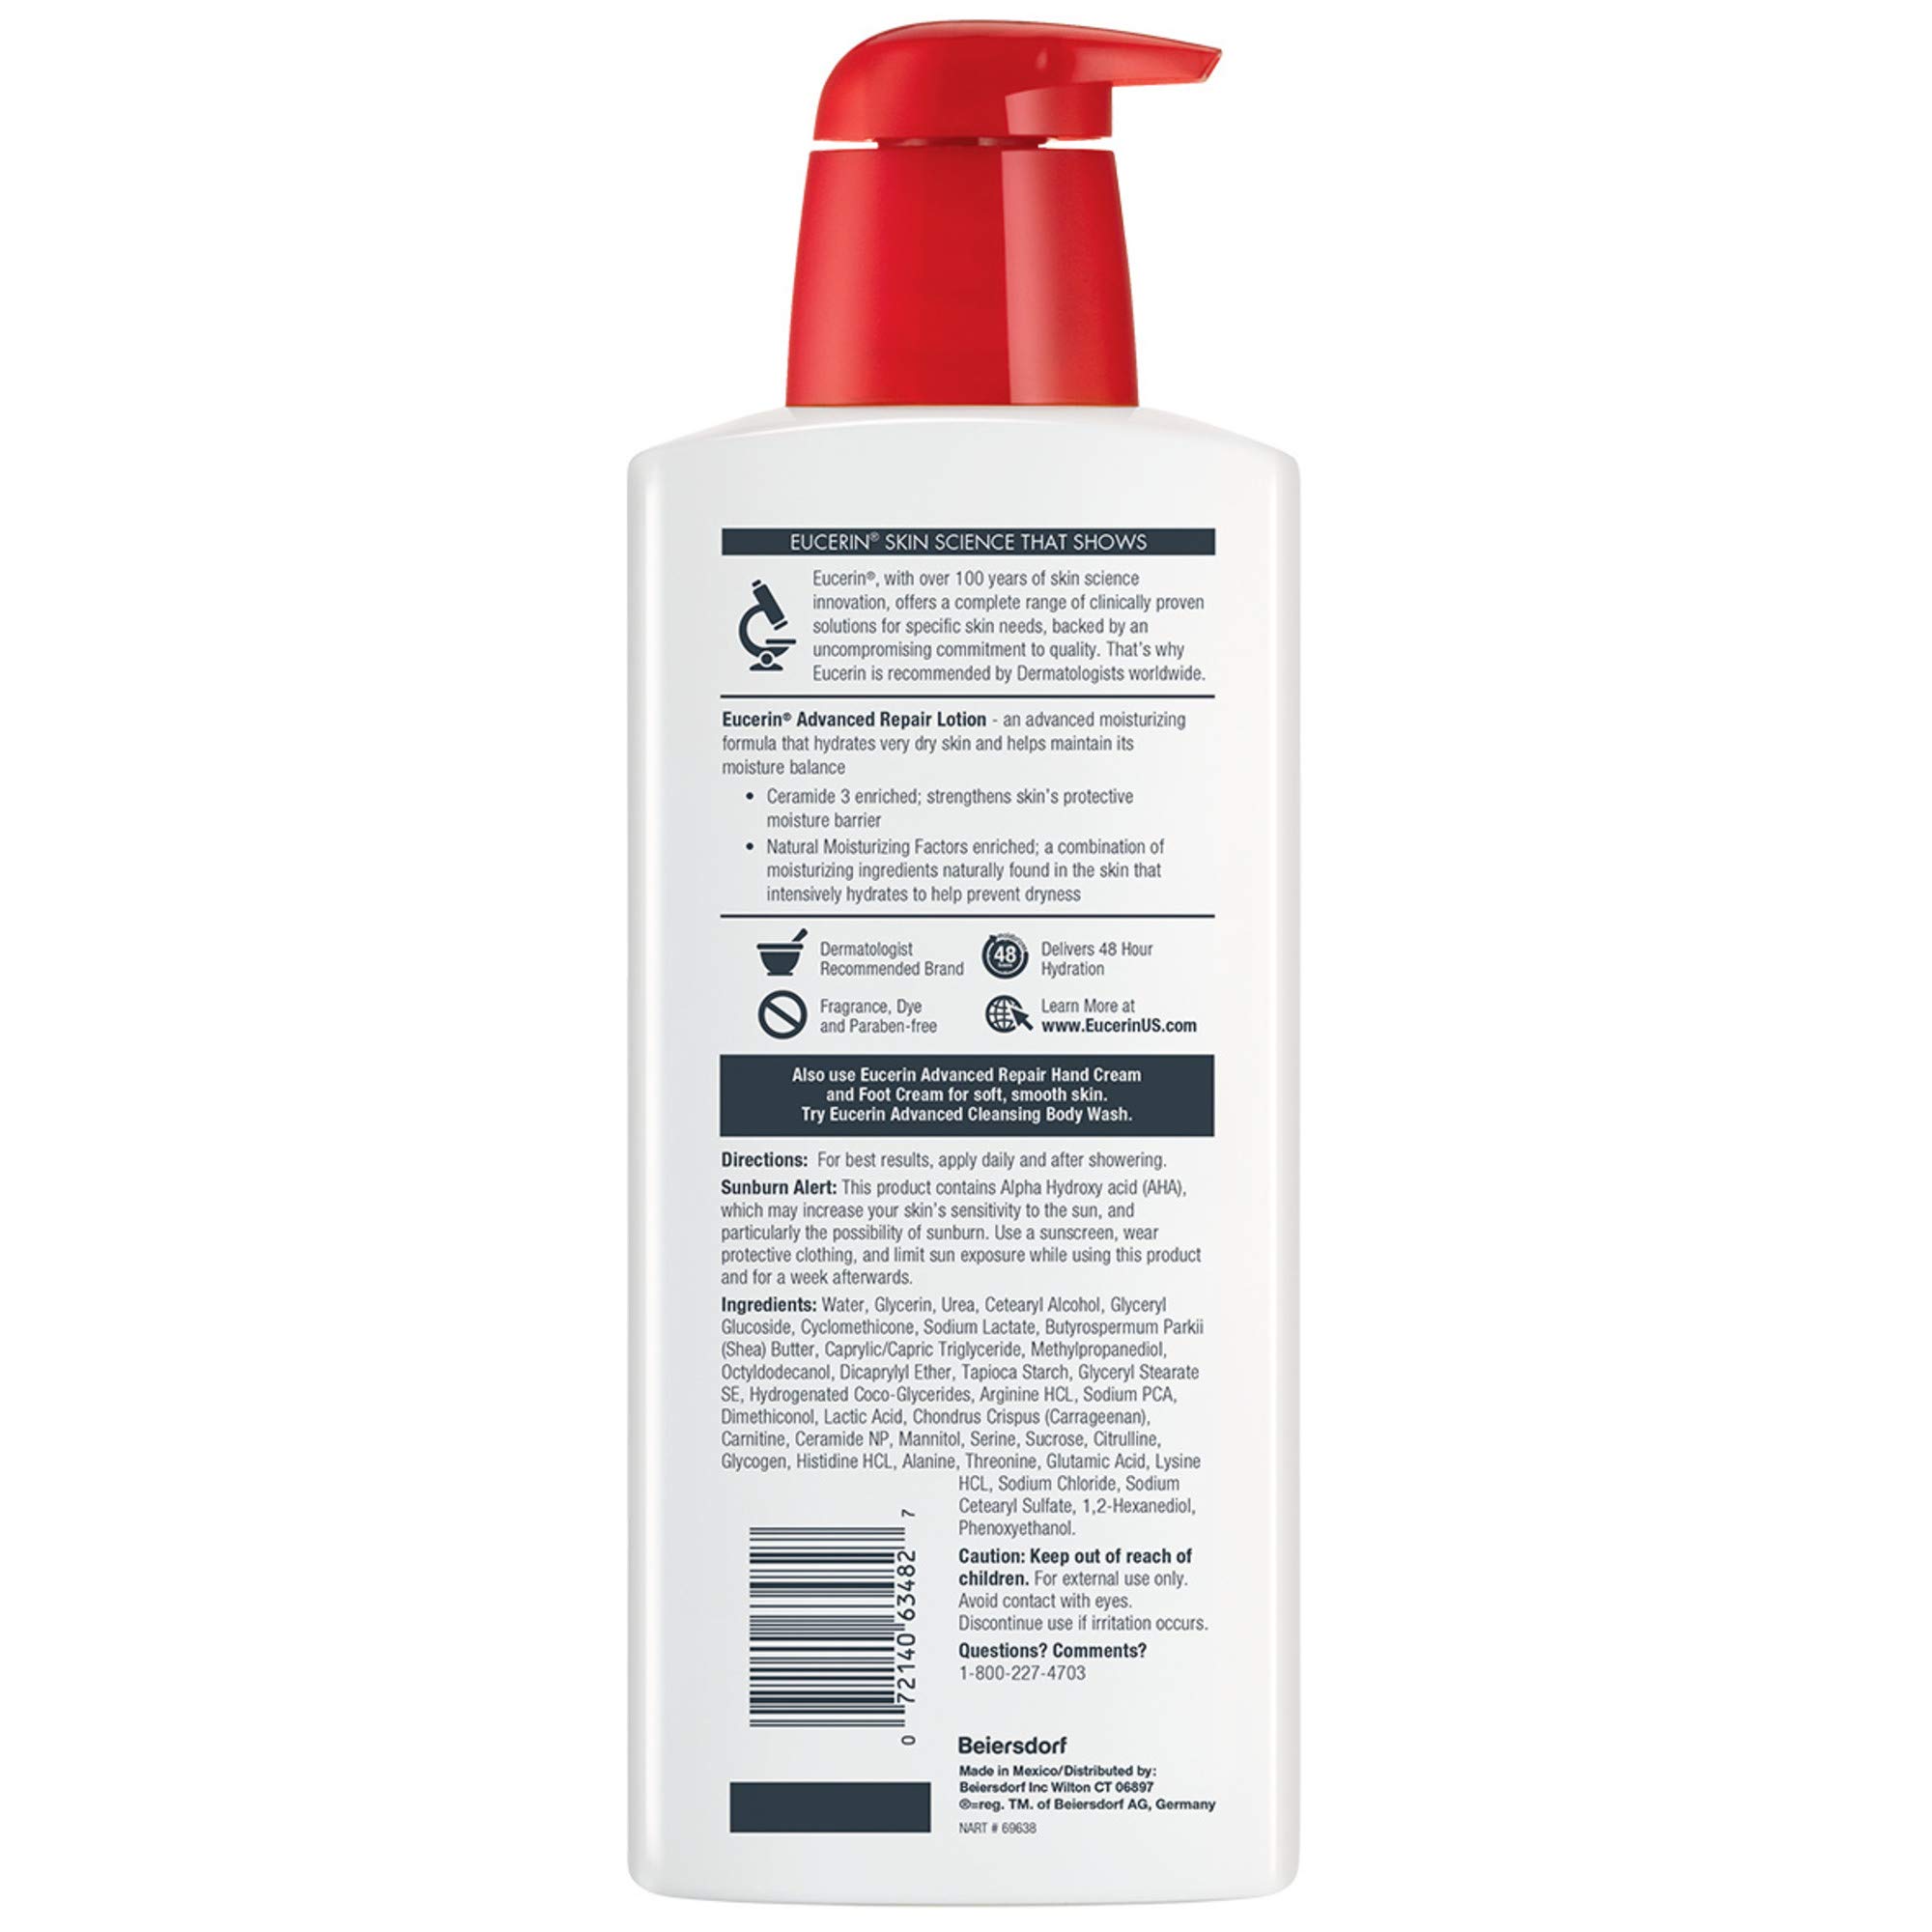 Eucerin Advanced Repair Body Lotion, Unscented Body Lotion for Dry Skin, 16.9 Fl Oz Pump Bottle